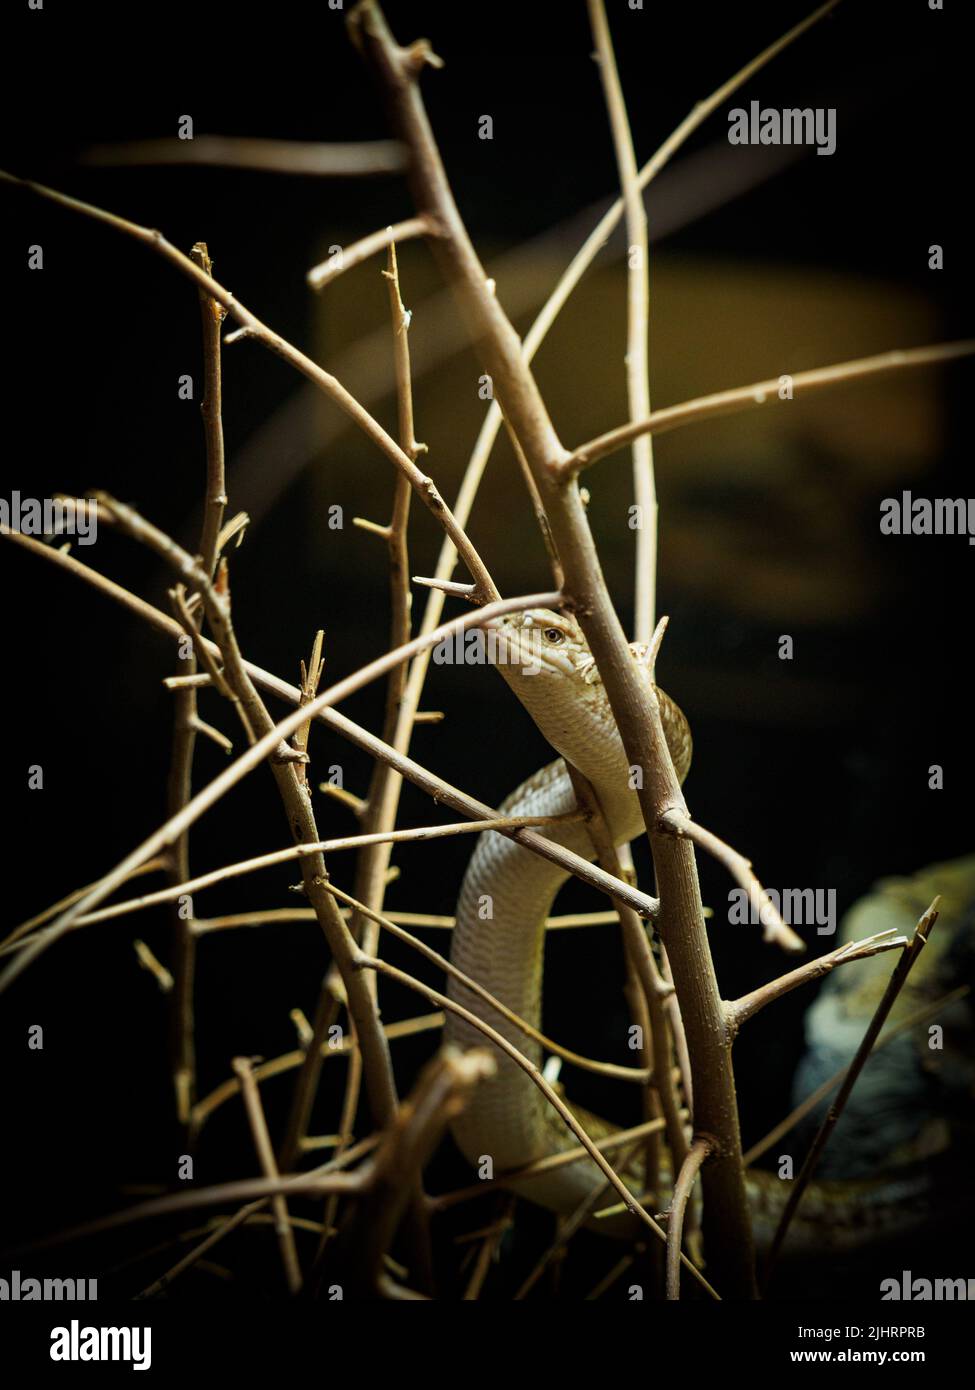 A view of a venomous snake in the branches Stock Photo